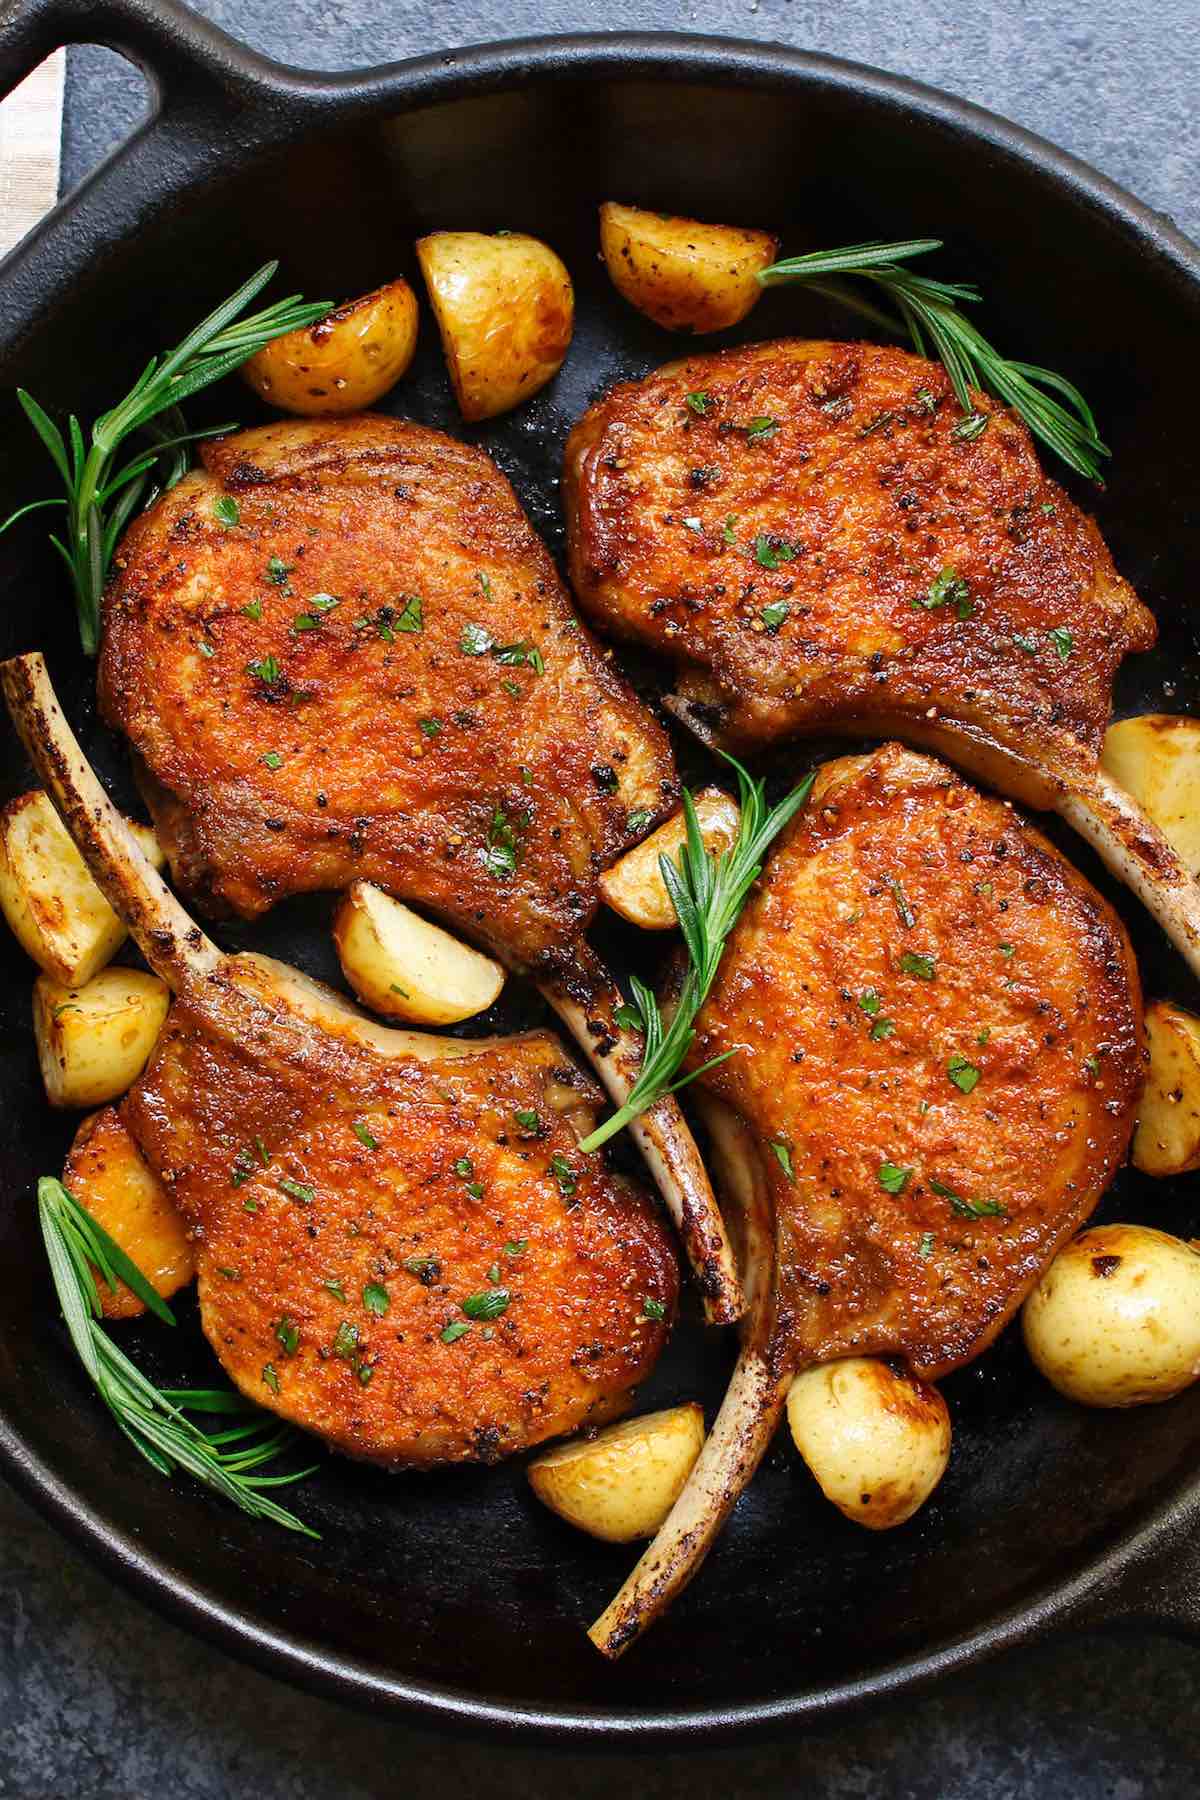 We've collected 16 Best Sides For Pork Chops that are easy to make at home. From veggies to rice, potatoes, and pasta, these side dishes are our favorites, and go well with both bone-in and boneless pork chops!